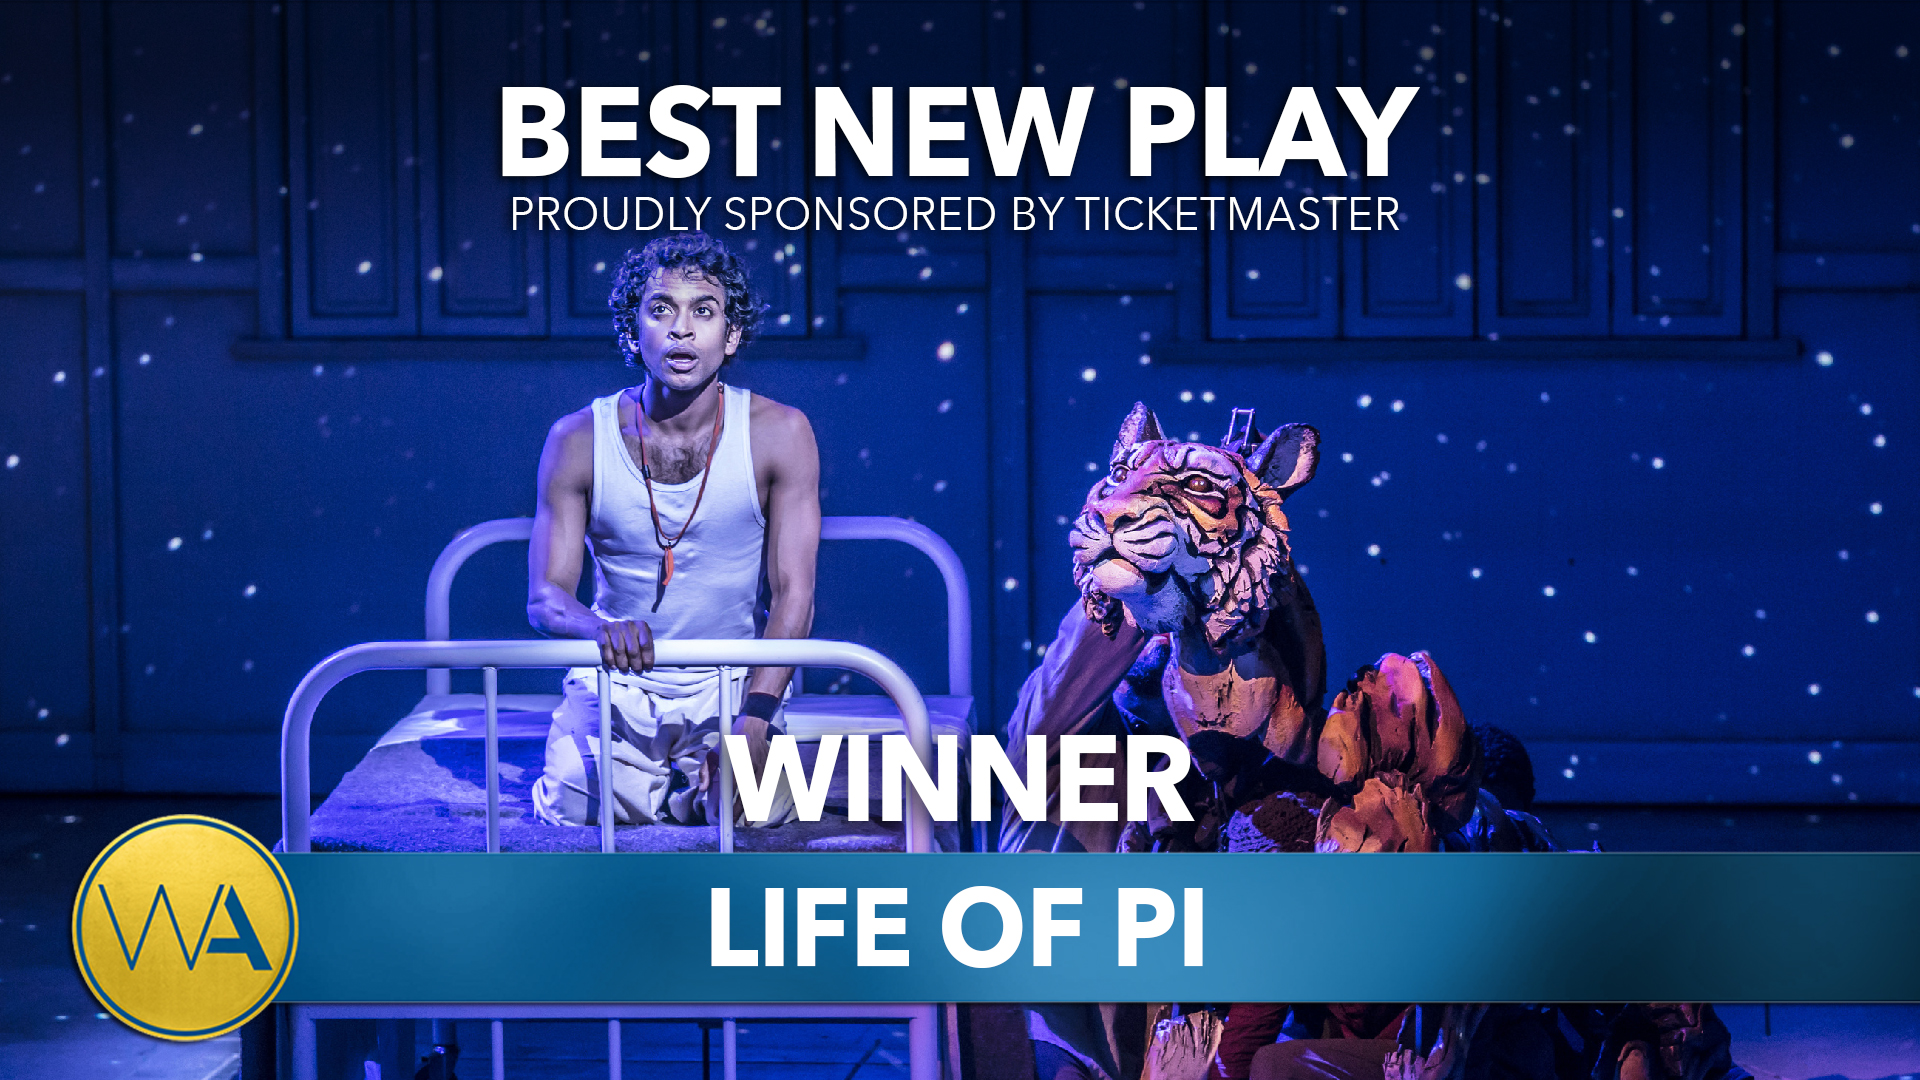 Life of Pi wins best new play at What's On Stage Awards | Ticketmaster